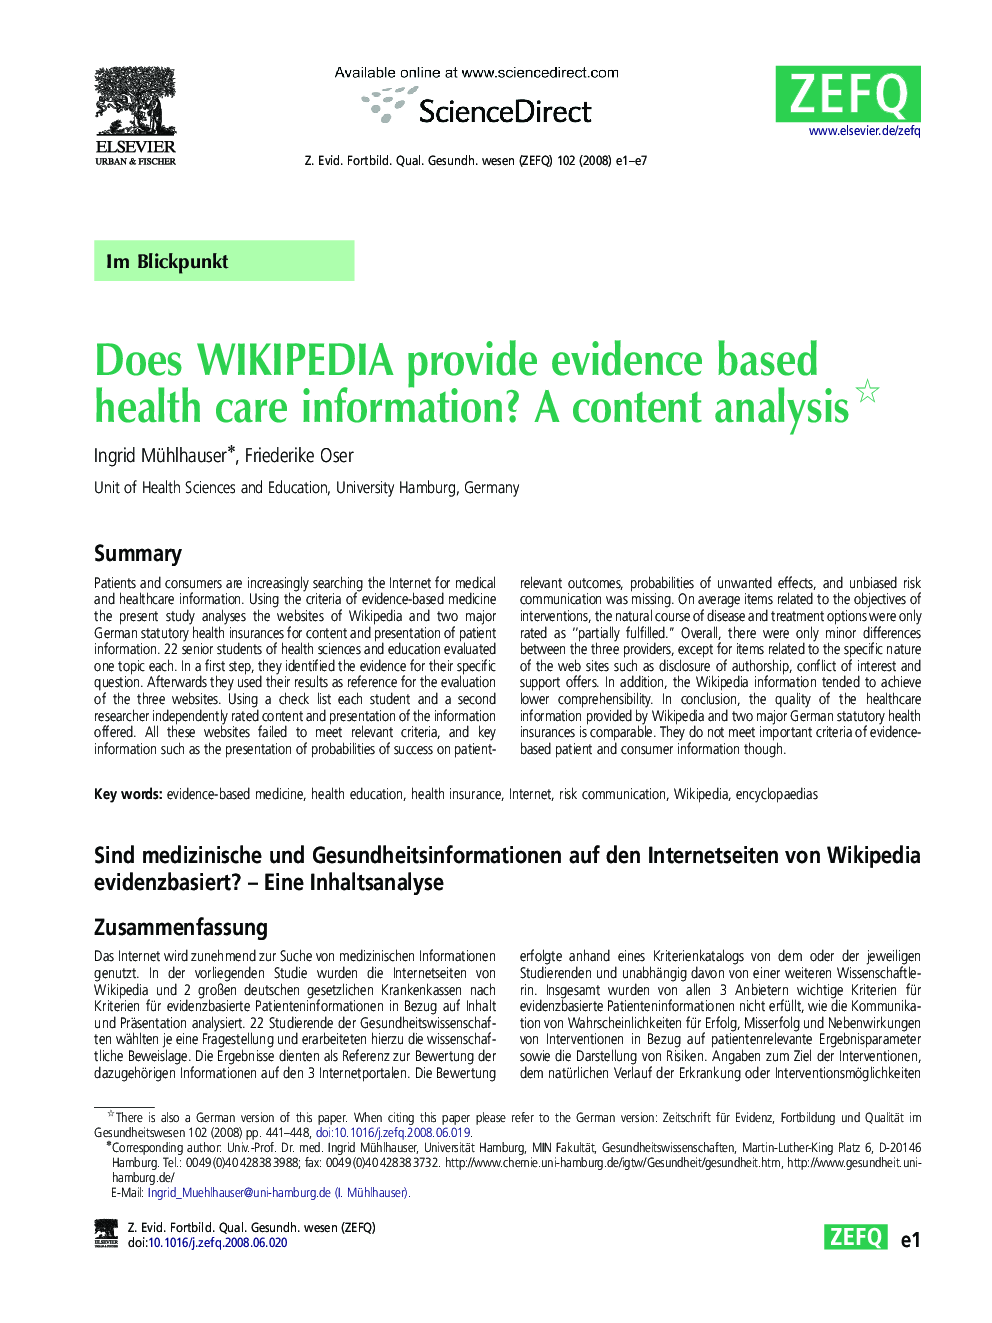 Does WIKIPEDIA provide evidence based health care information? A content analysis 